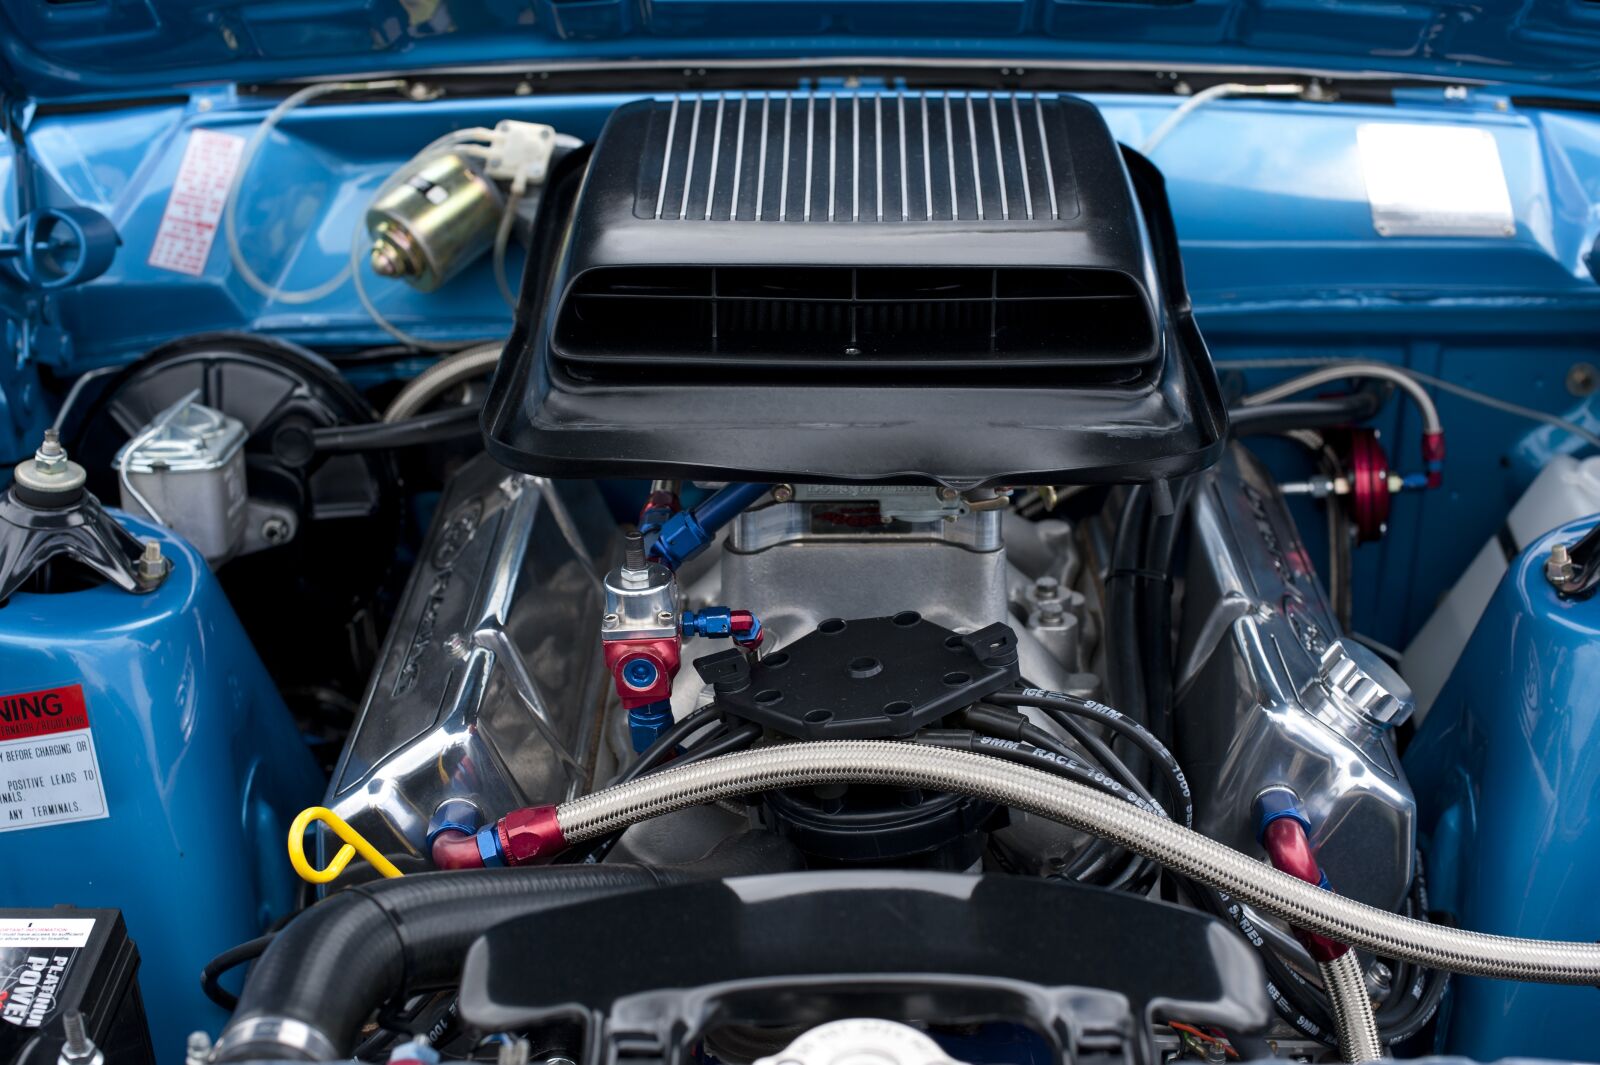 Nikon D700 sample photo. Ford, muscle car, engine photography